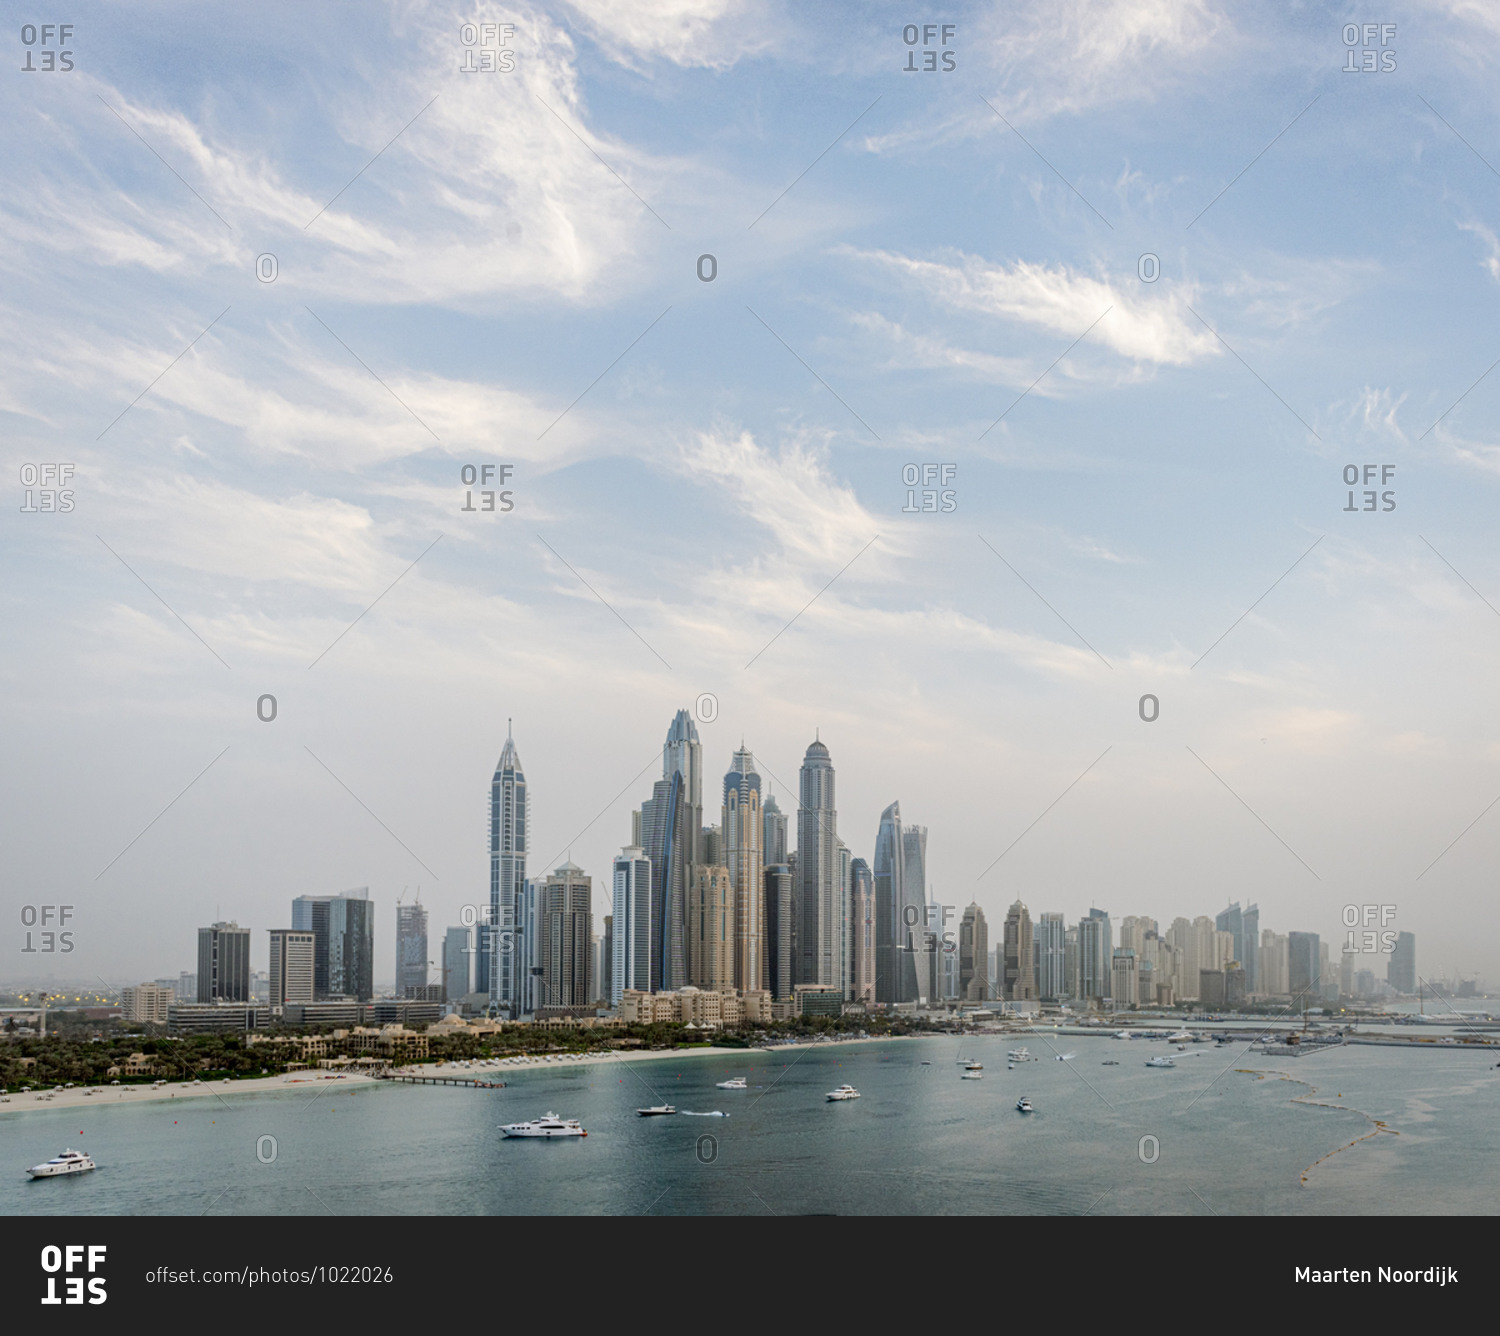 Skyscrapers in the downtown skyline and boats in the harbor, Dubai, United Arab Emirates